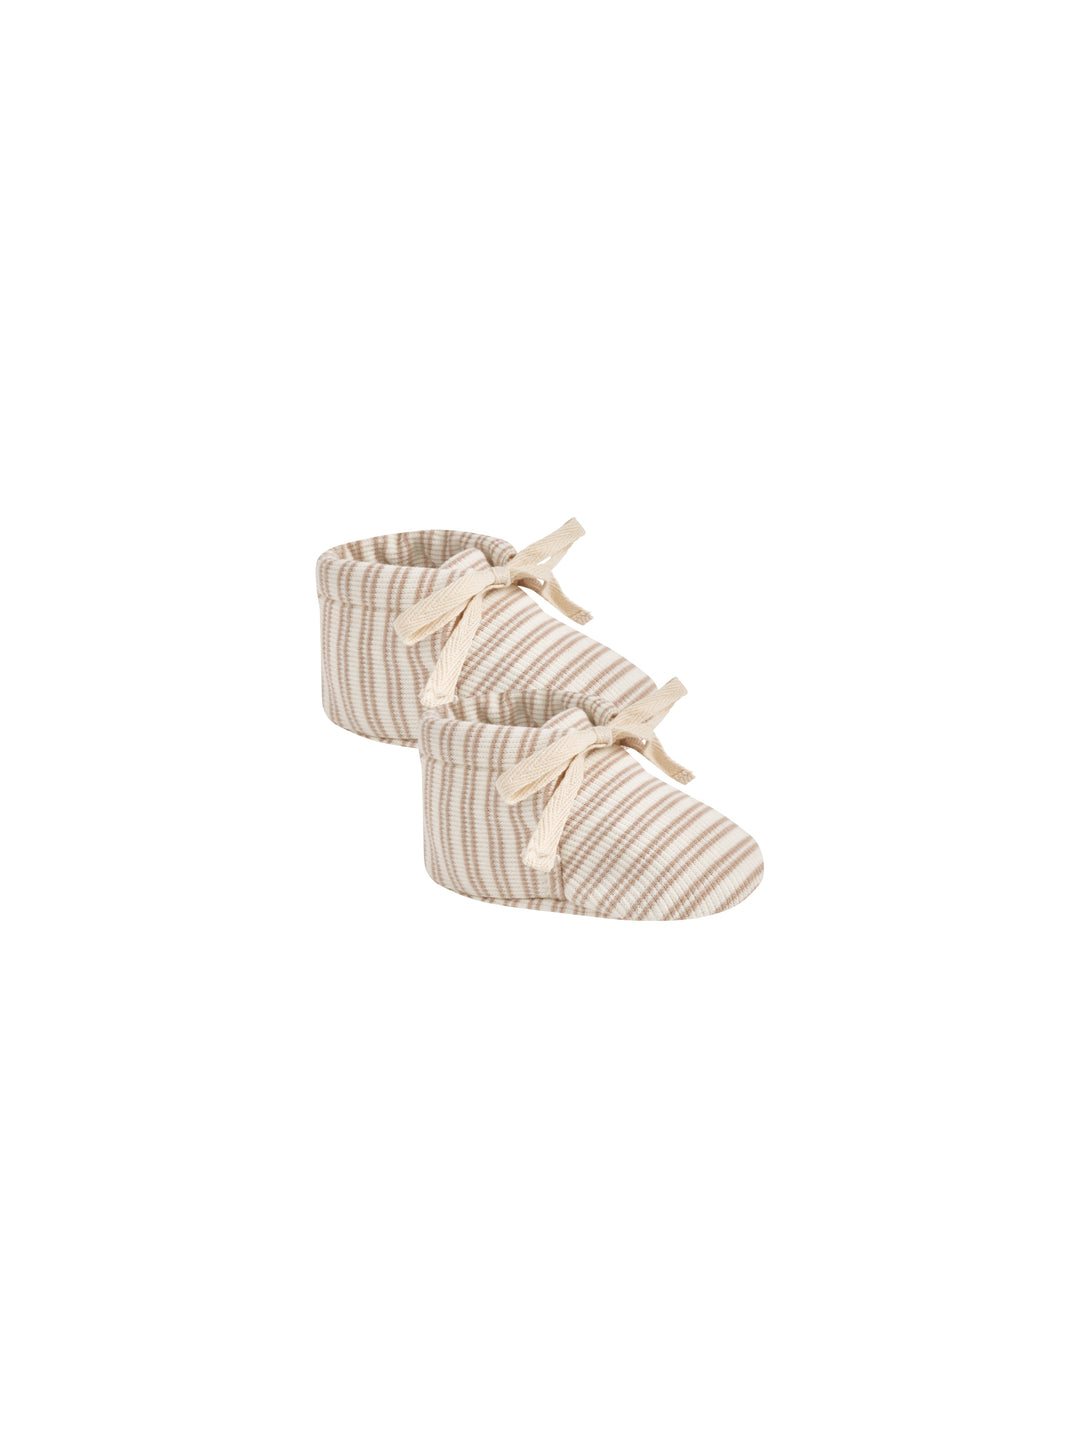 Ribbed Baby Booties- Oat Stripe